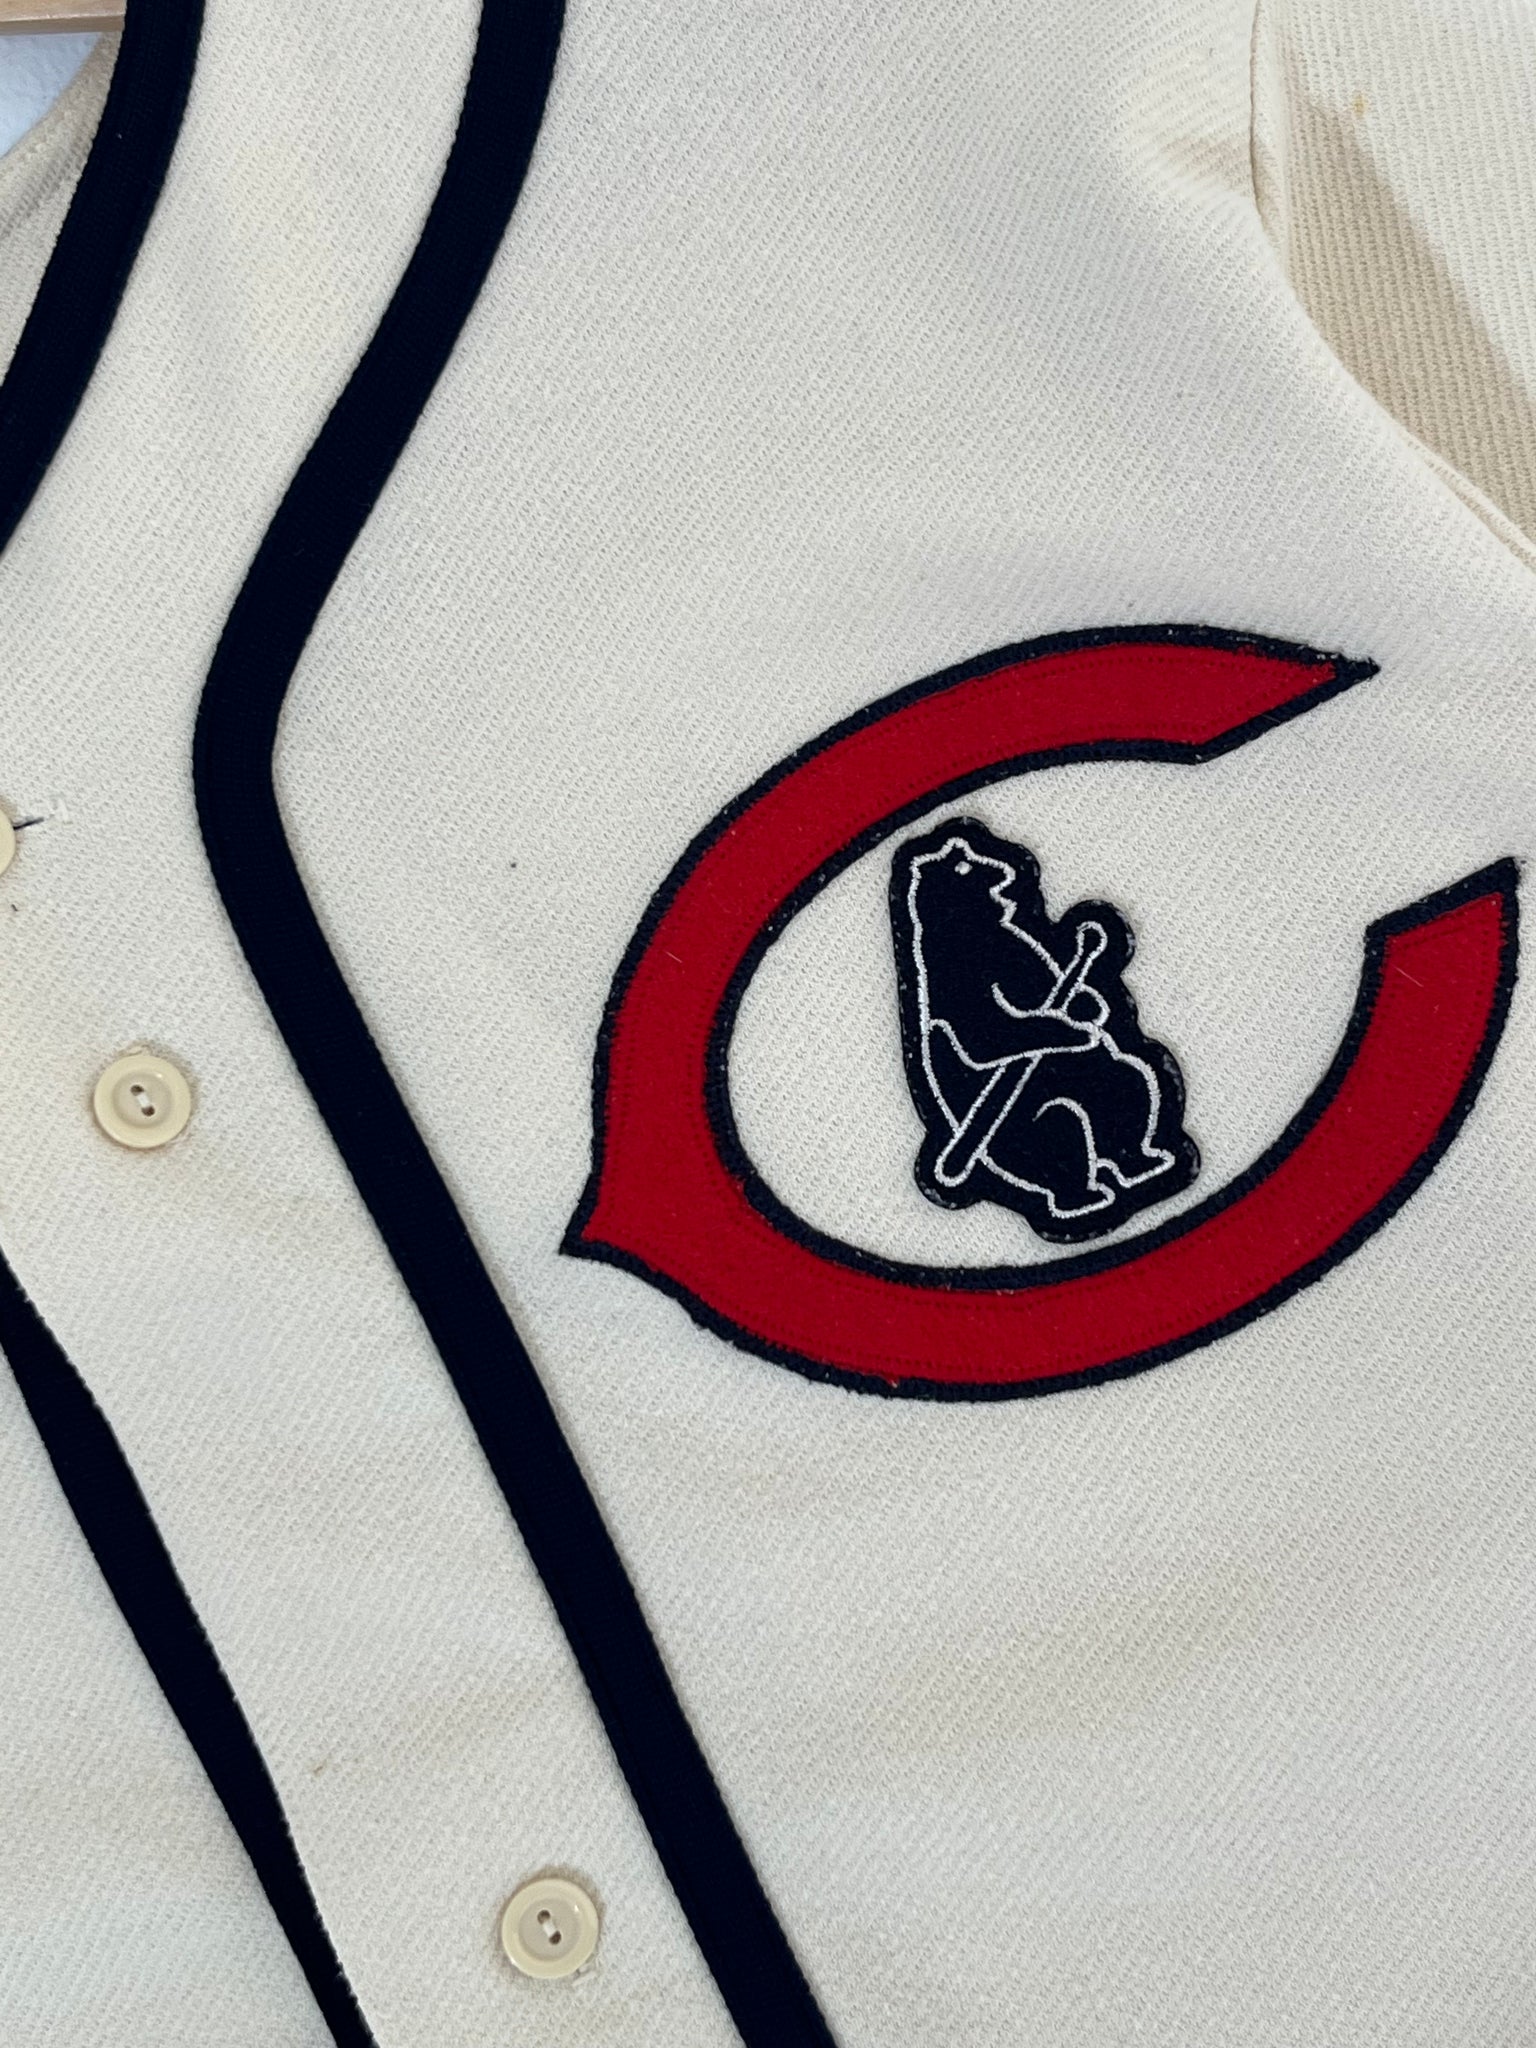 chicago cubs old jersey